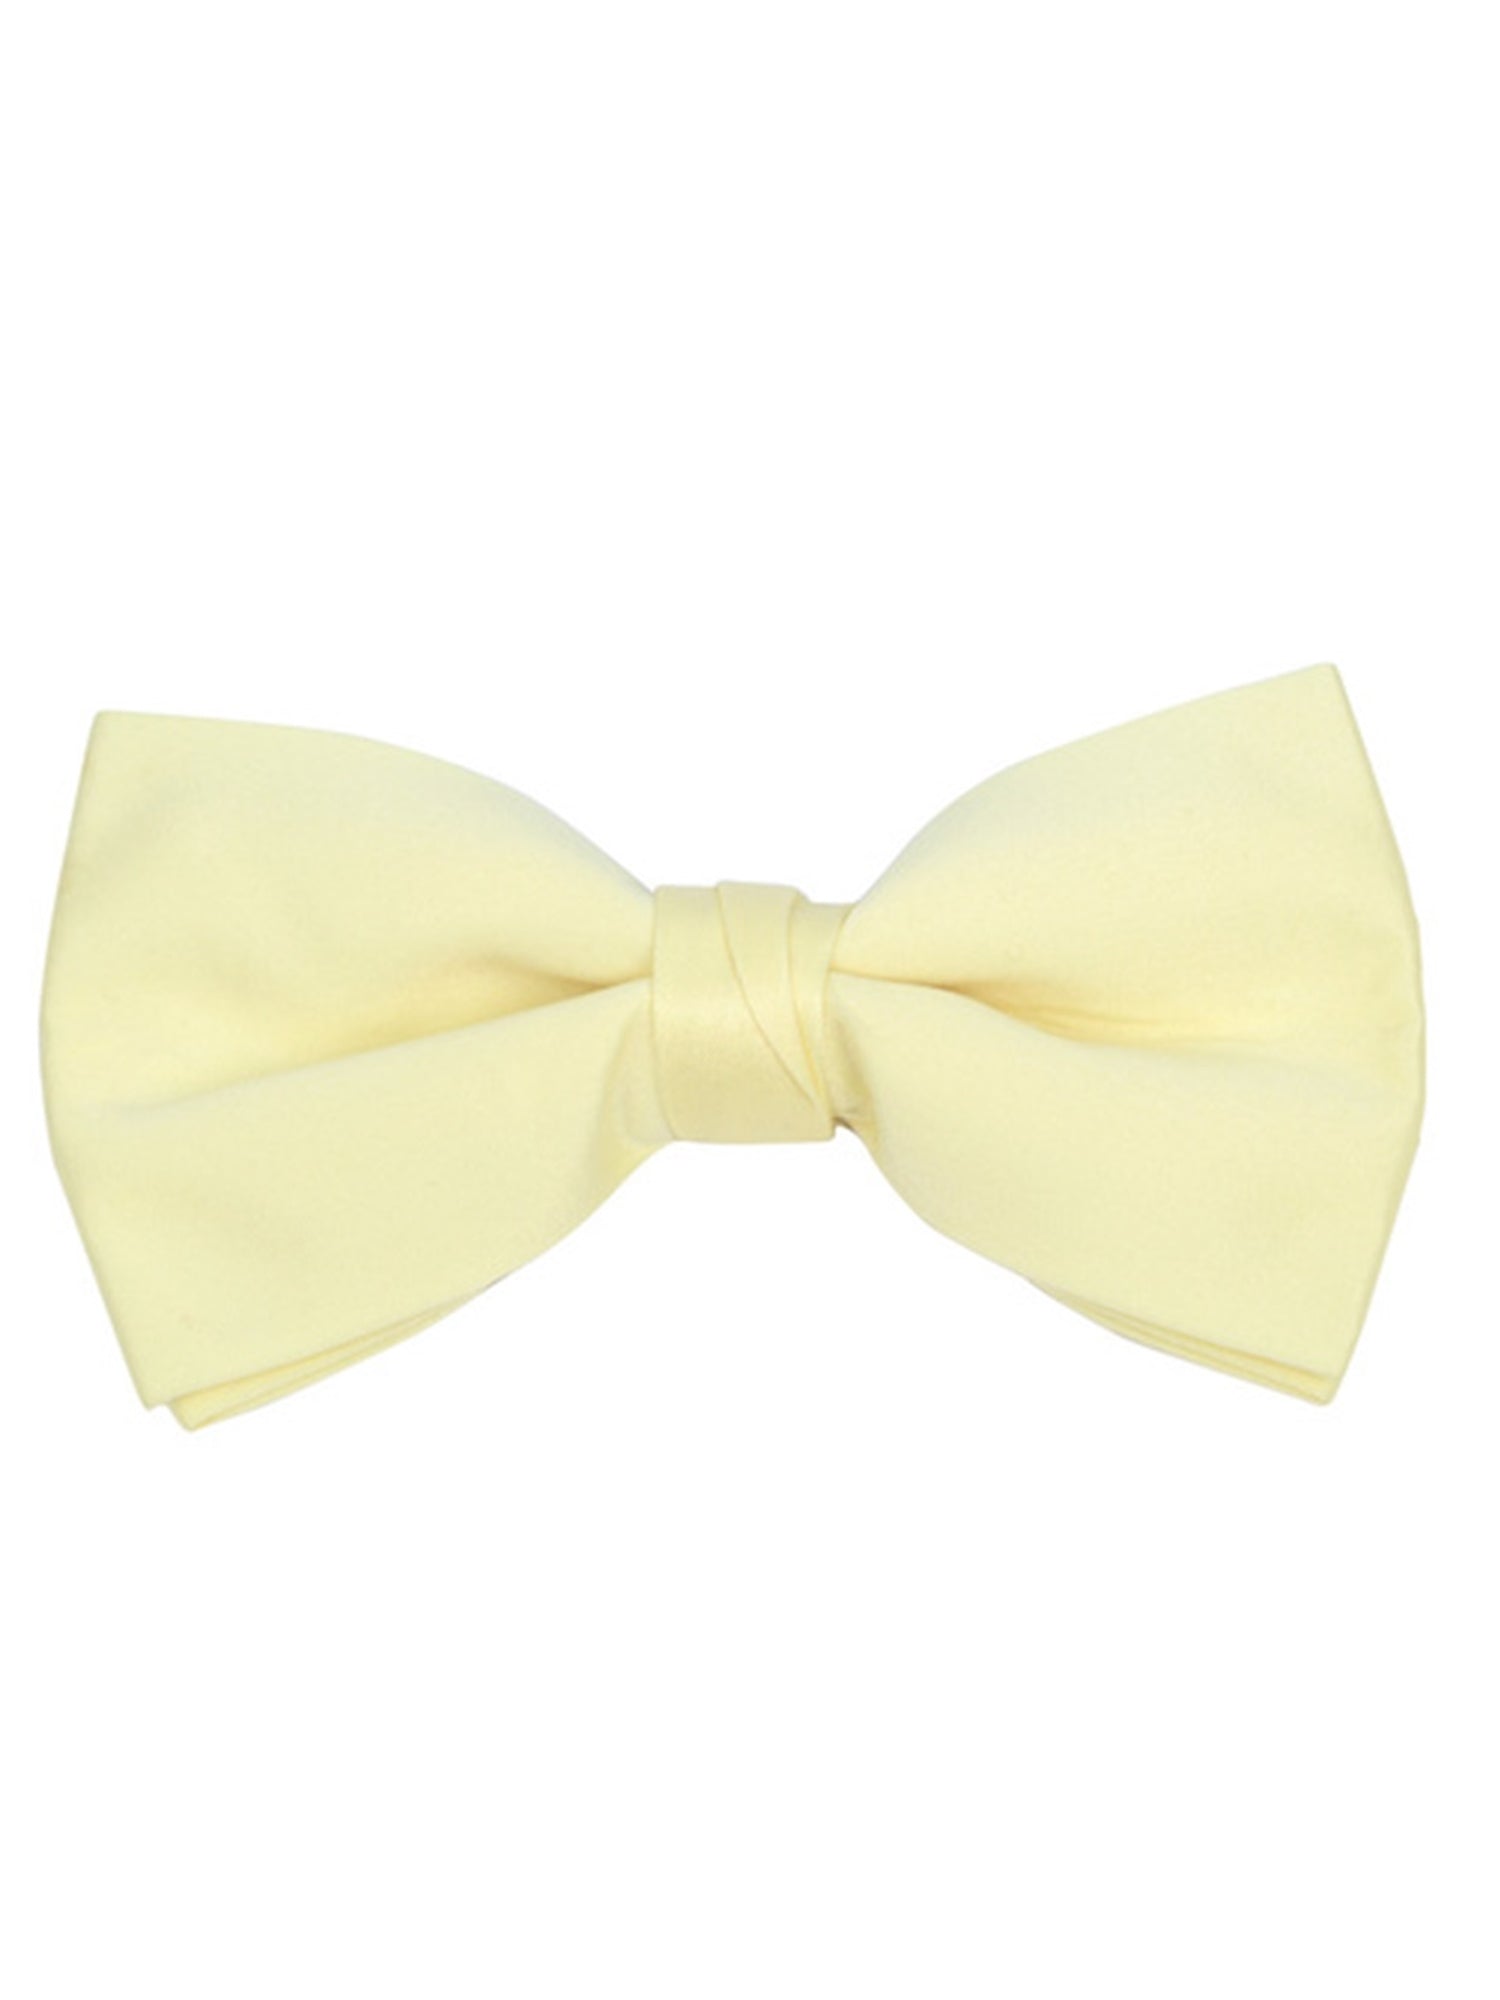 Young Boy's Pre-tied Clip On Bow Tie - Formal Tuxedo Solid Color Boy's Solid Color Bow Tie TheDapperTie Light Yellow One Size 